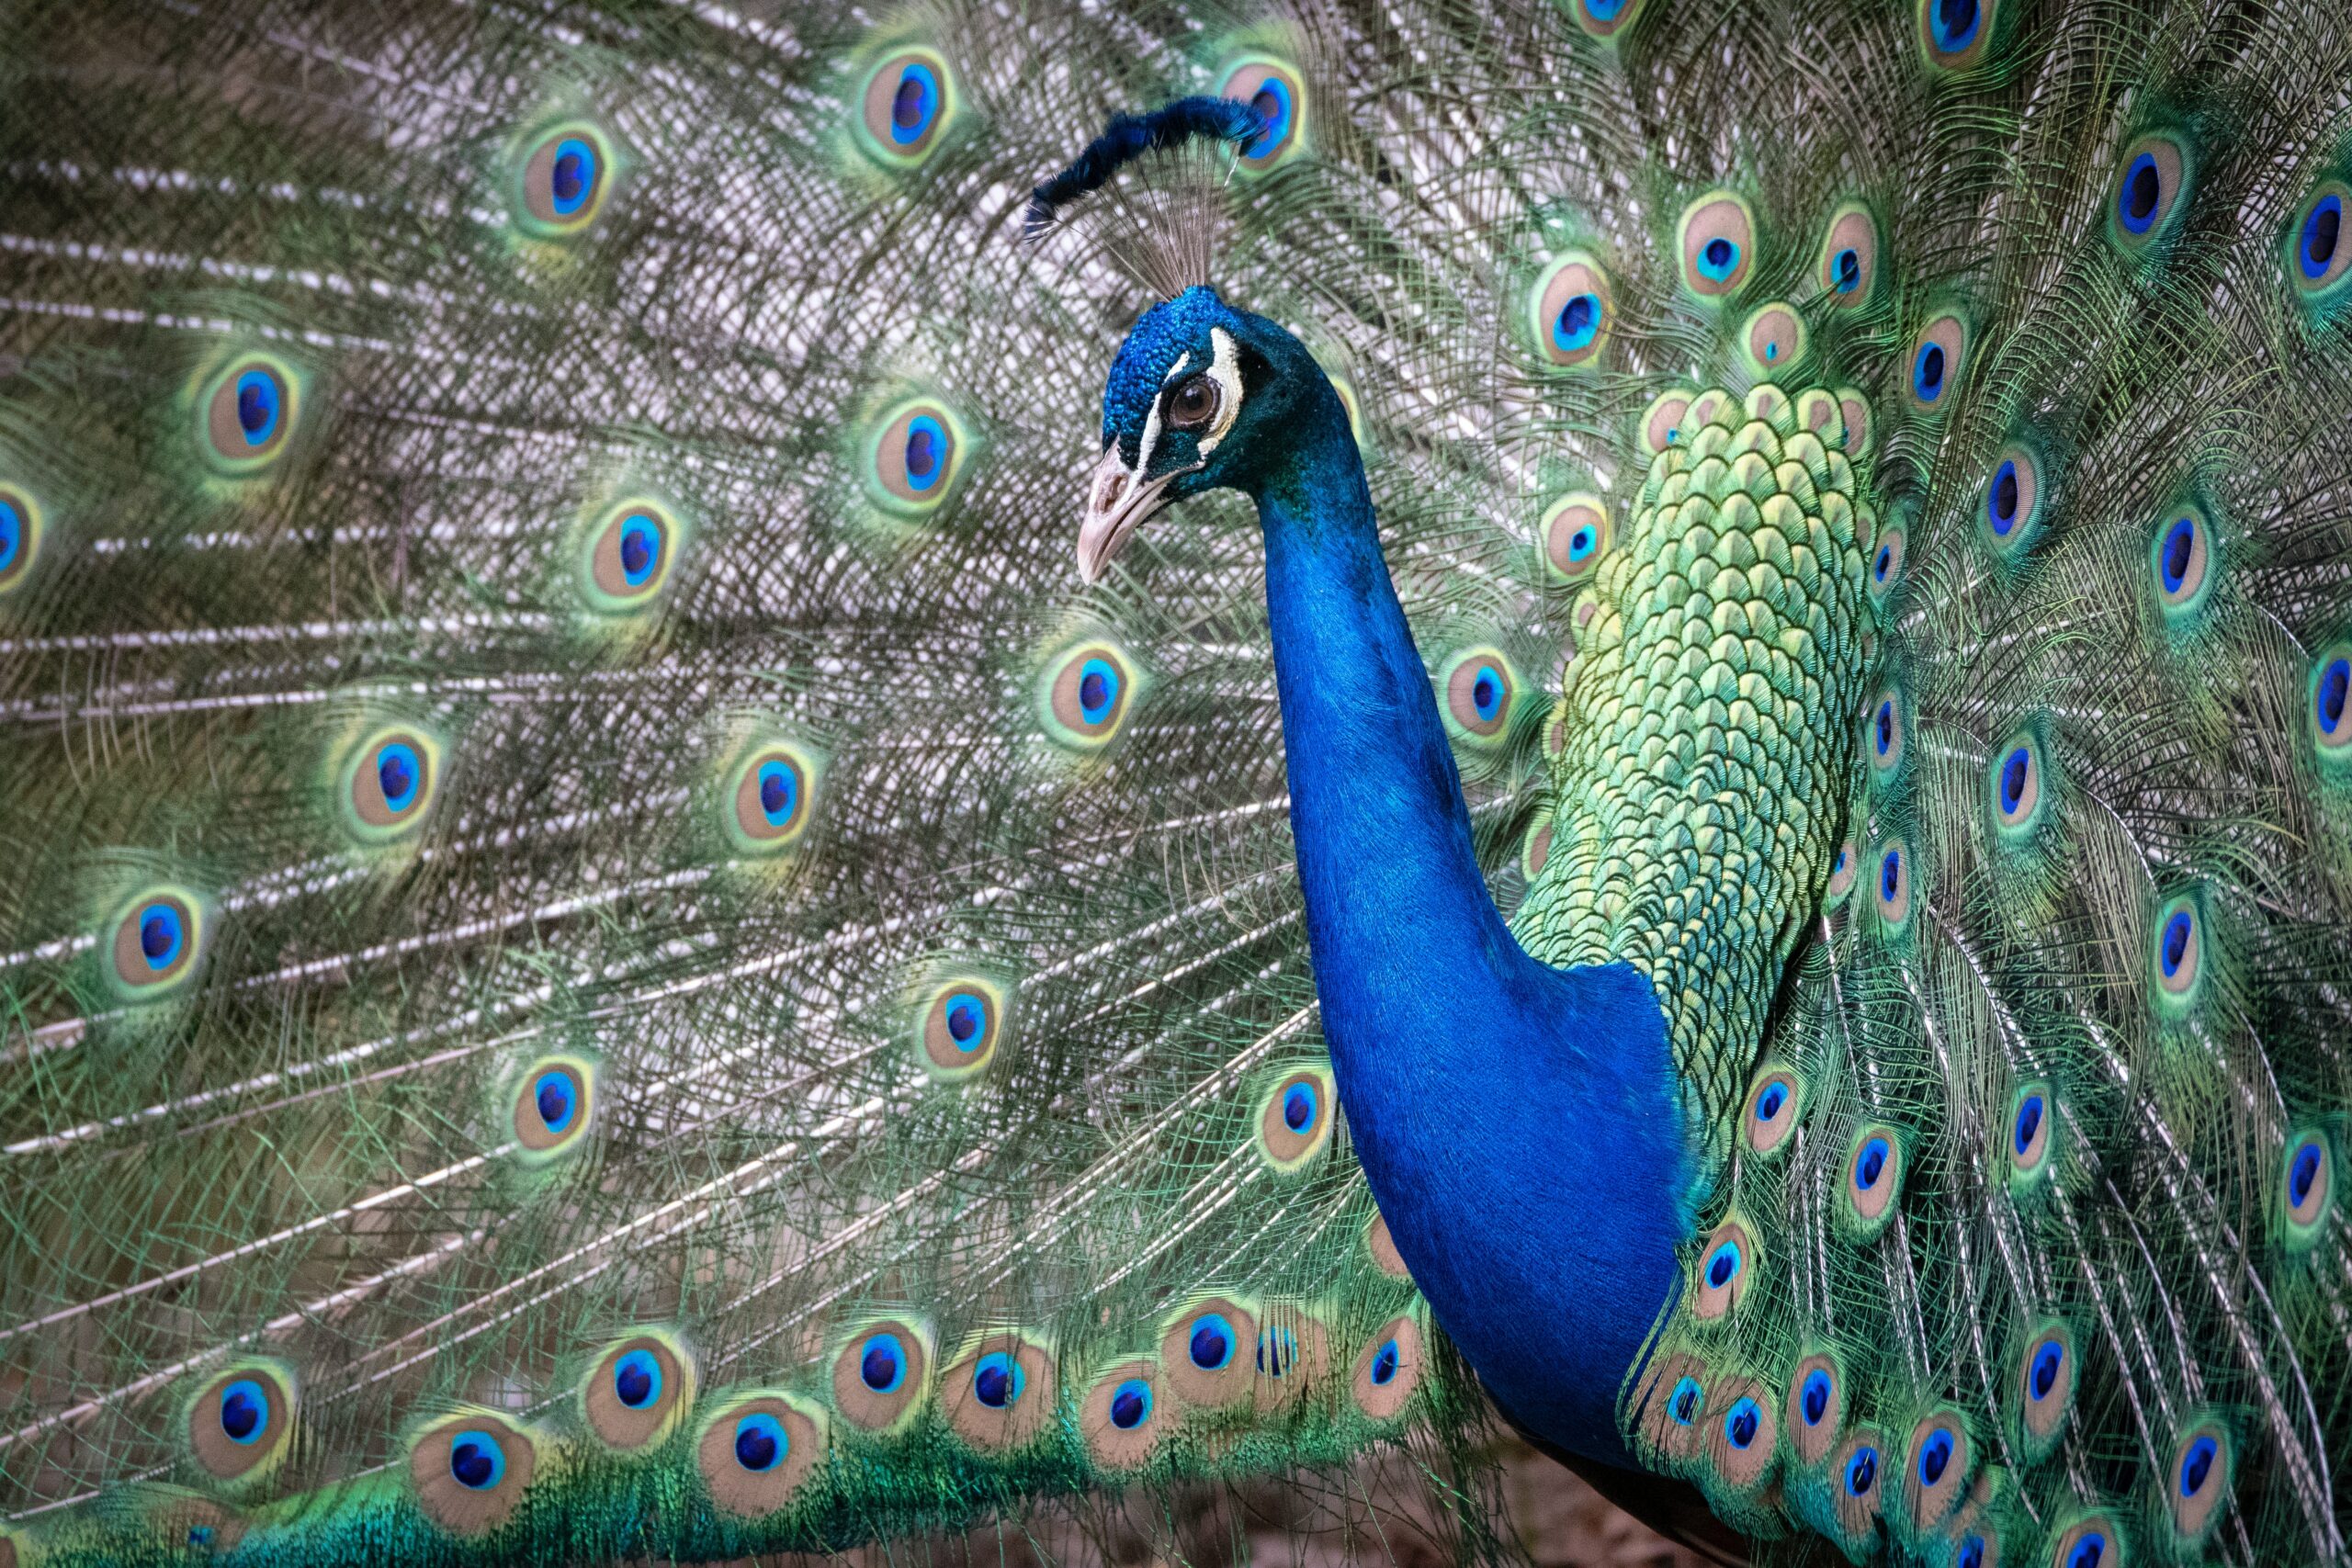 Photograph of peacock with its feathers